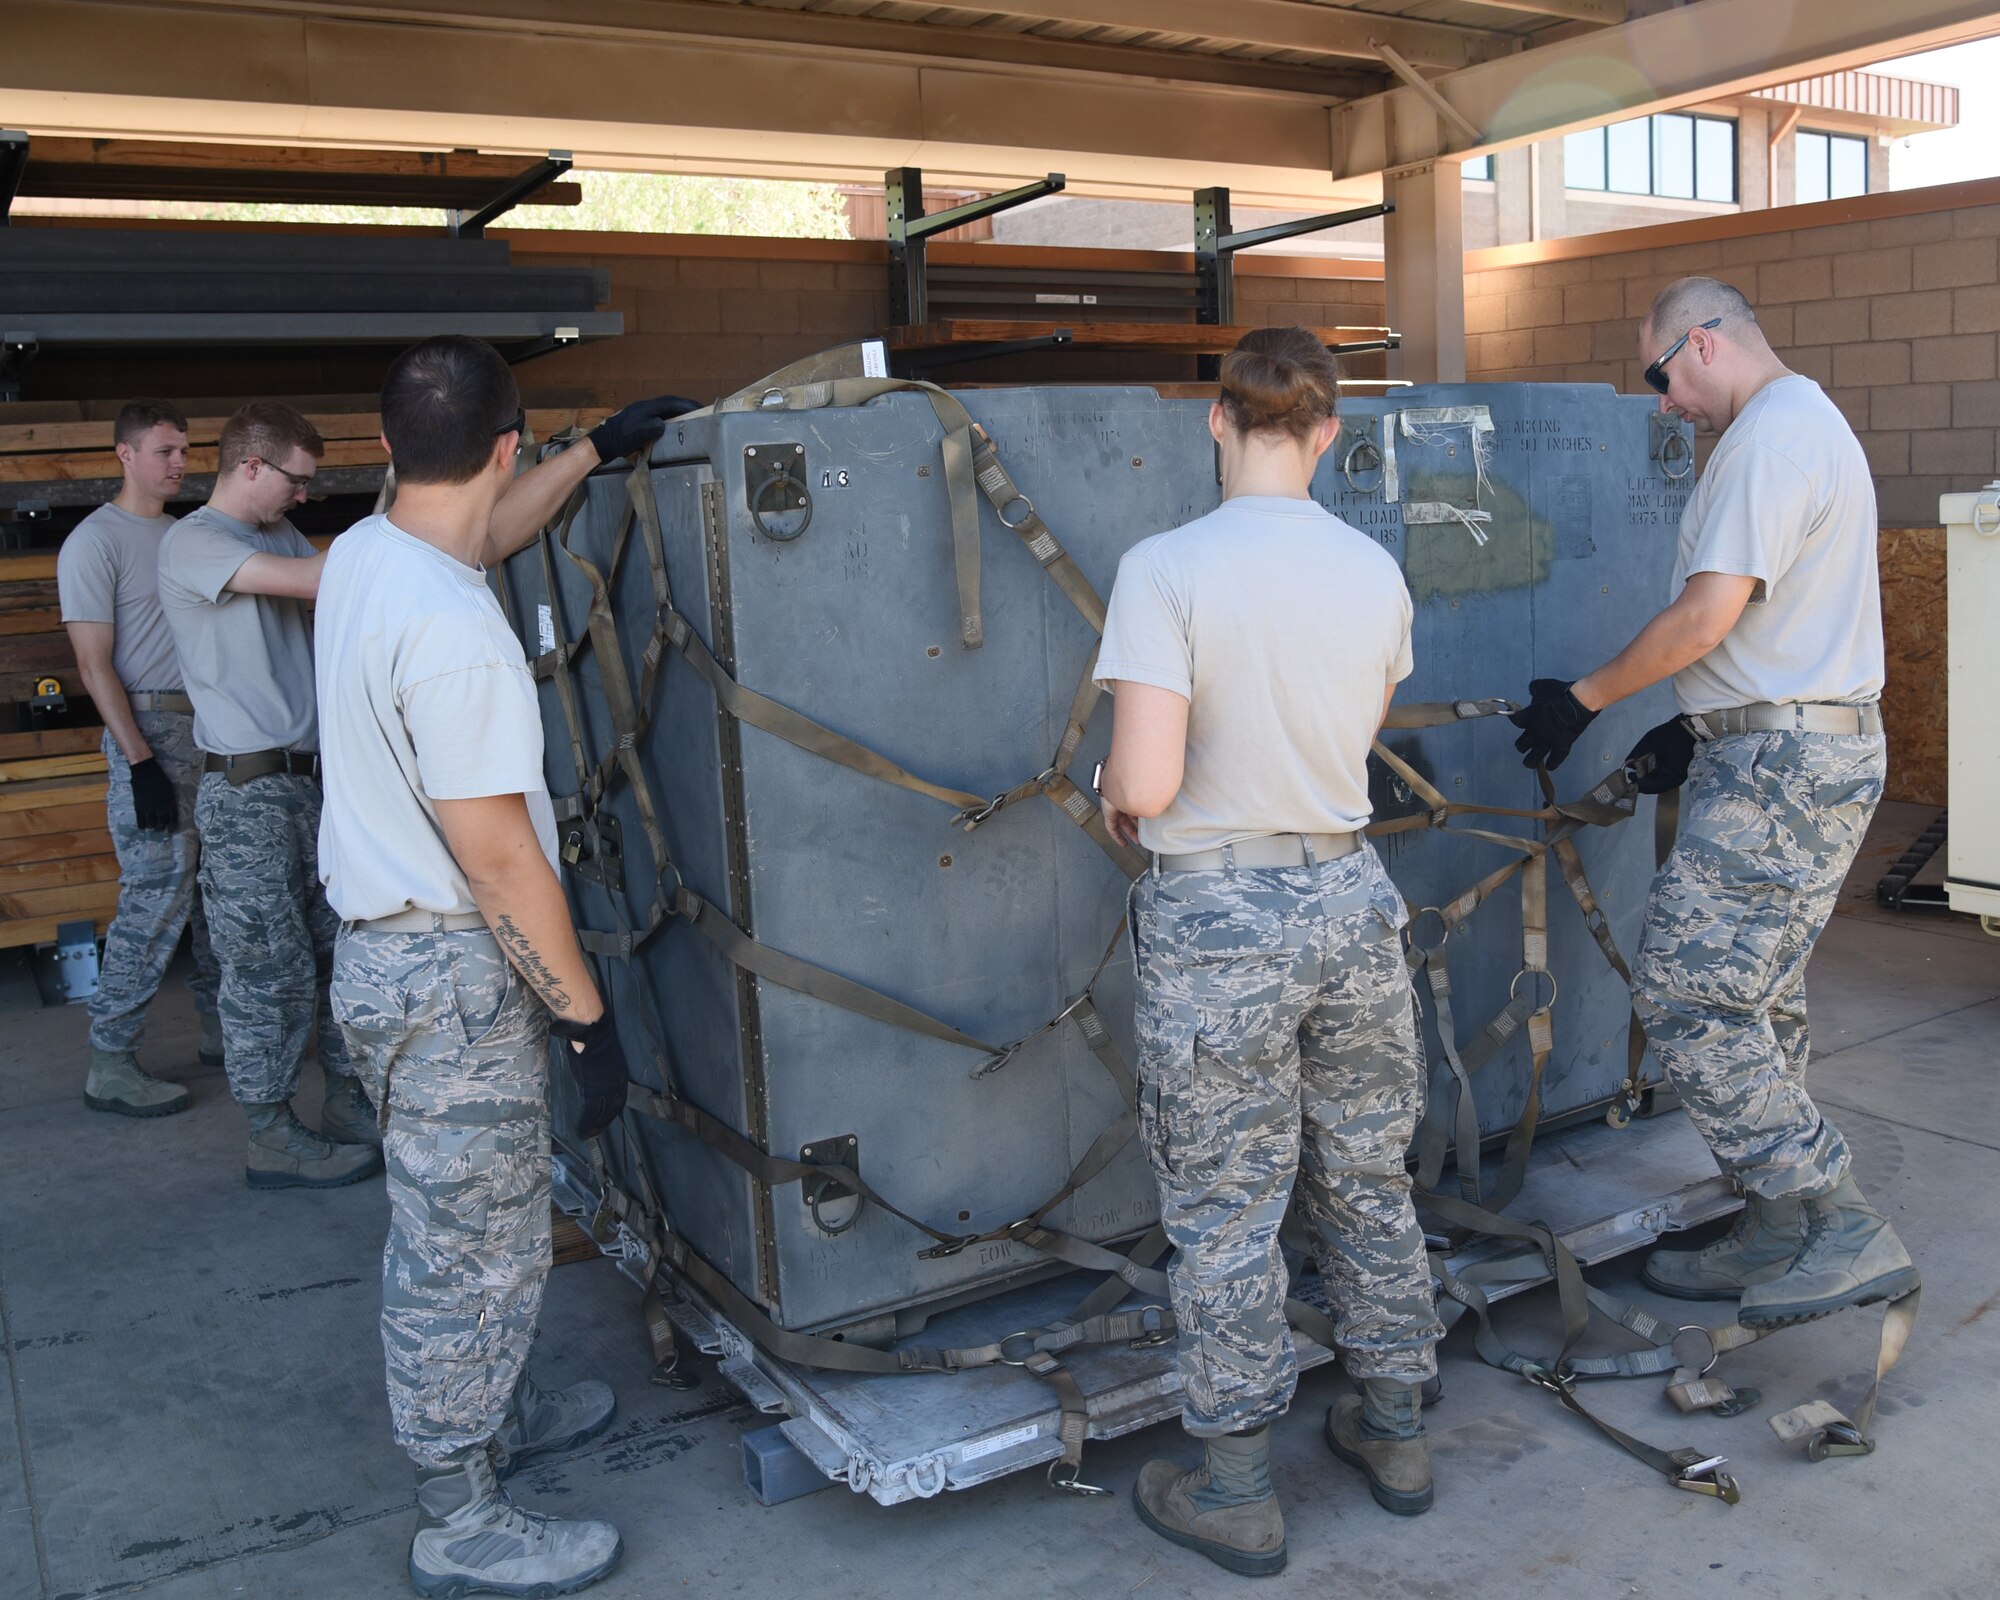 Airmen from the 161st Air Refueling Wing secure a shipping container onto a pallet during a cargo pallet preparation class at Goldwater Air National Guard Base, June 3, 2018. Working as a team insures that the load is properly secured for transportation and that all safety precautions have been made prior to transporting the cargo.  (U.S. Air National Guard photo by Staff Sgt. Wes Parrell)